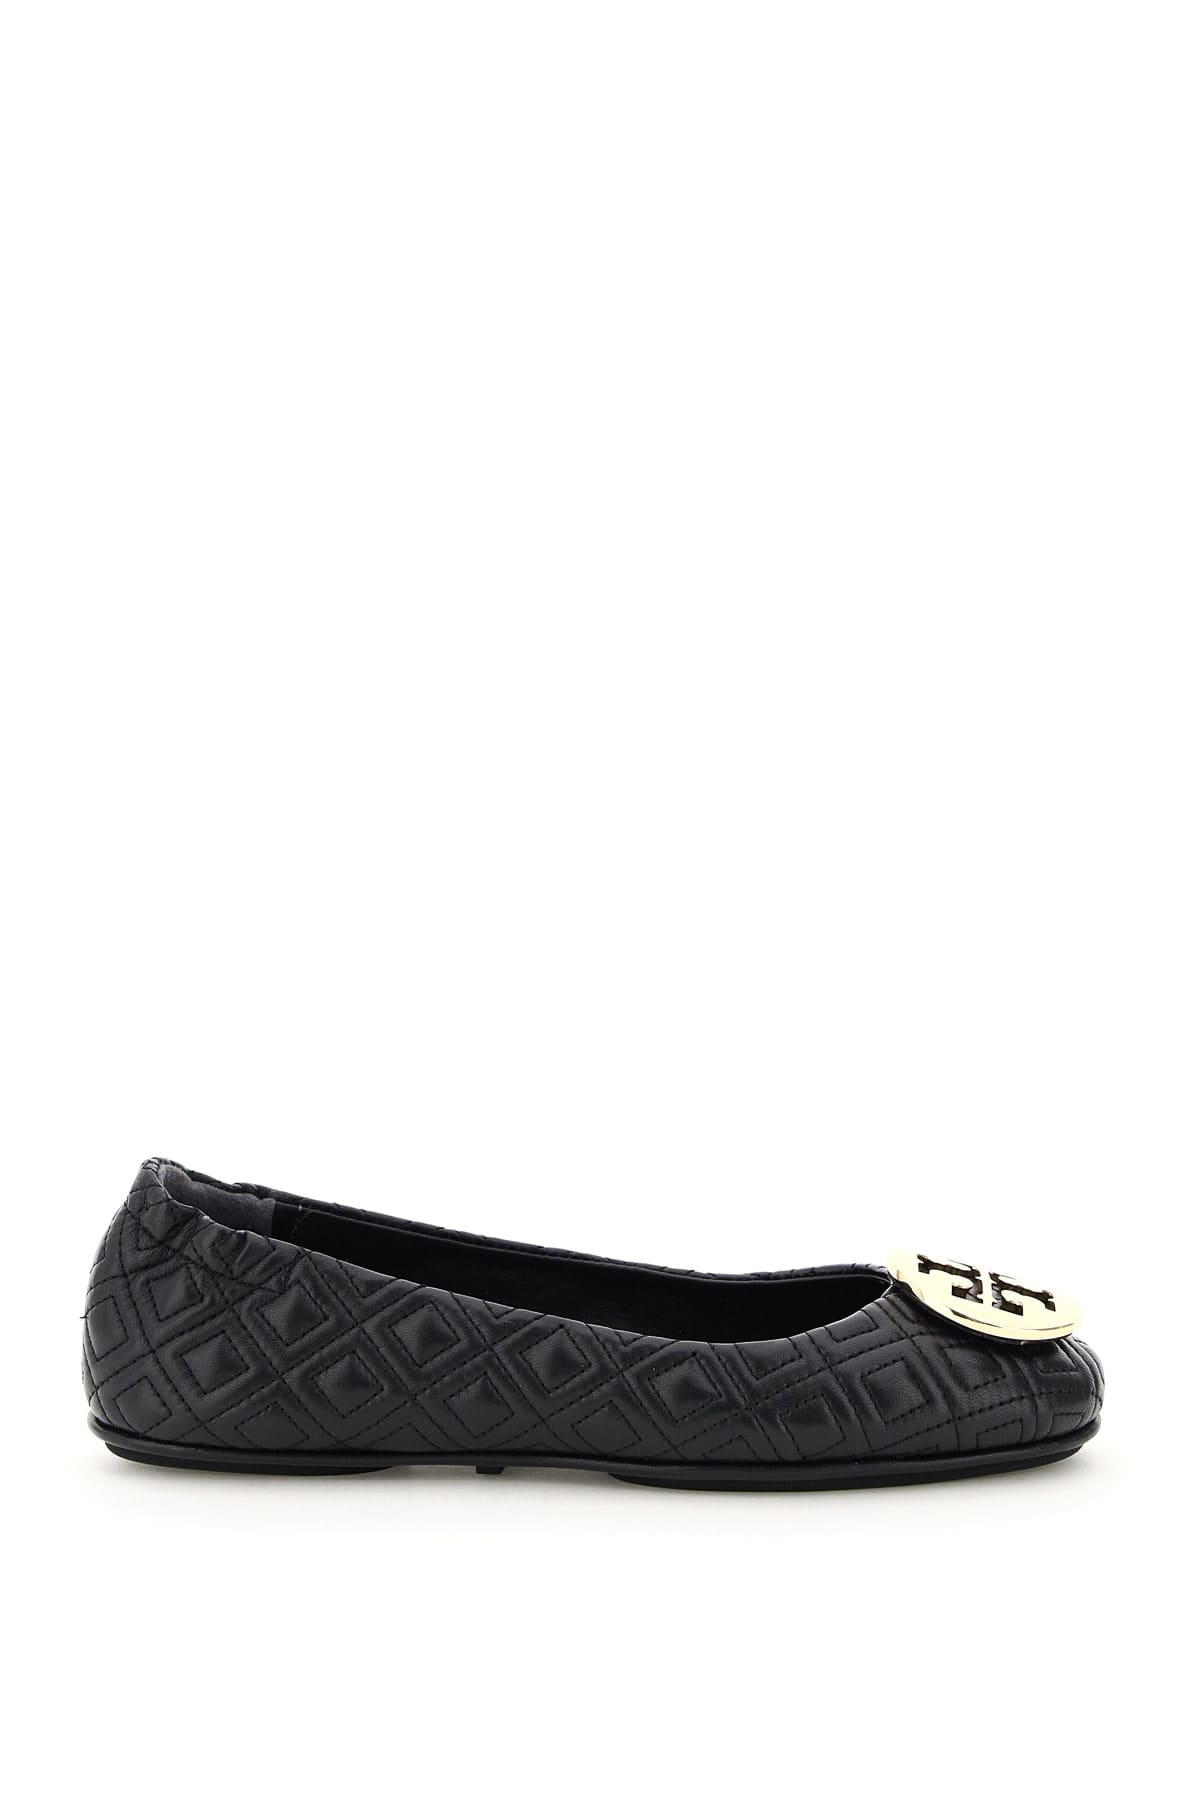 Tory Burch Quilted Minnie Ballerinas